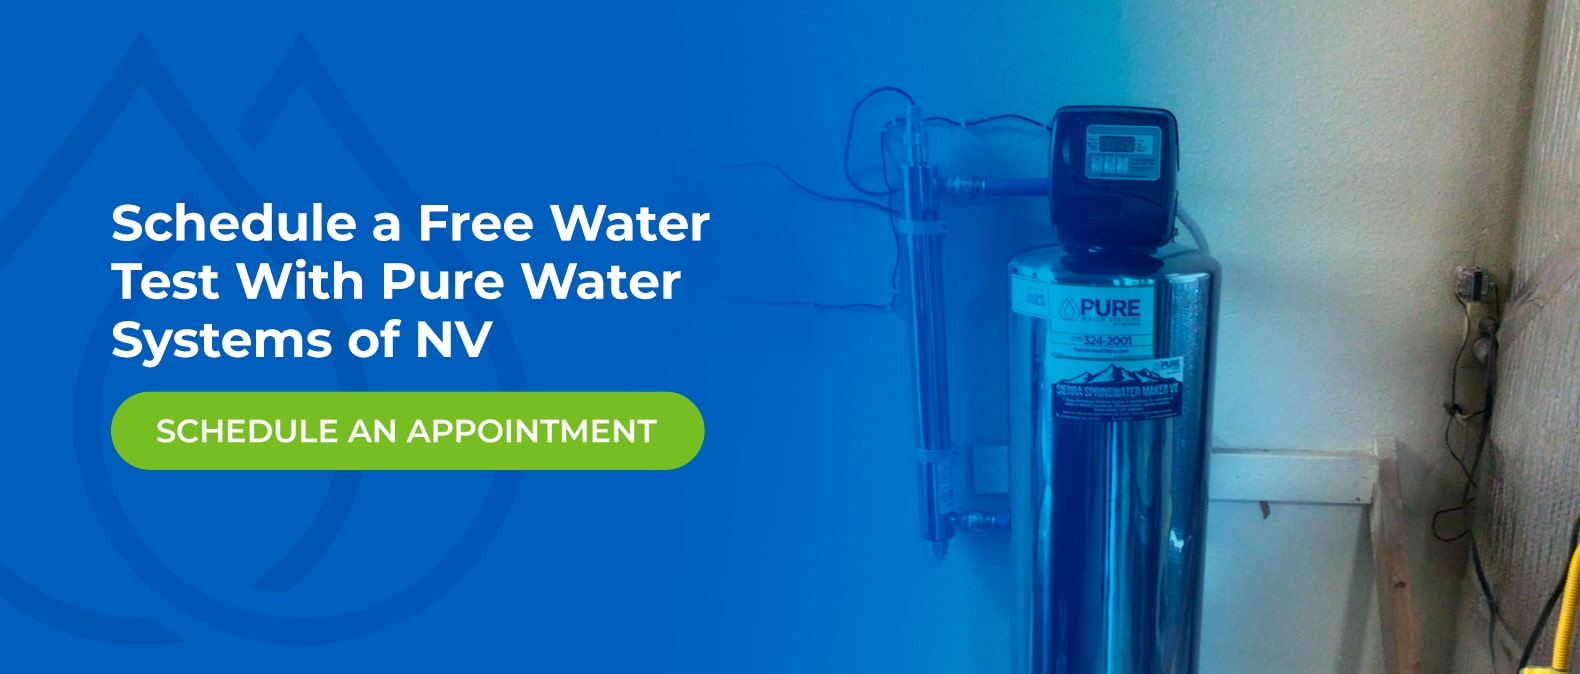 Schedule a Free Water Test With Pure Water Systems of NV 